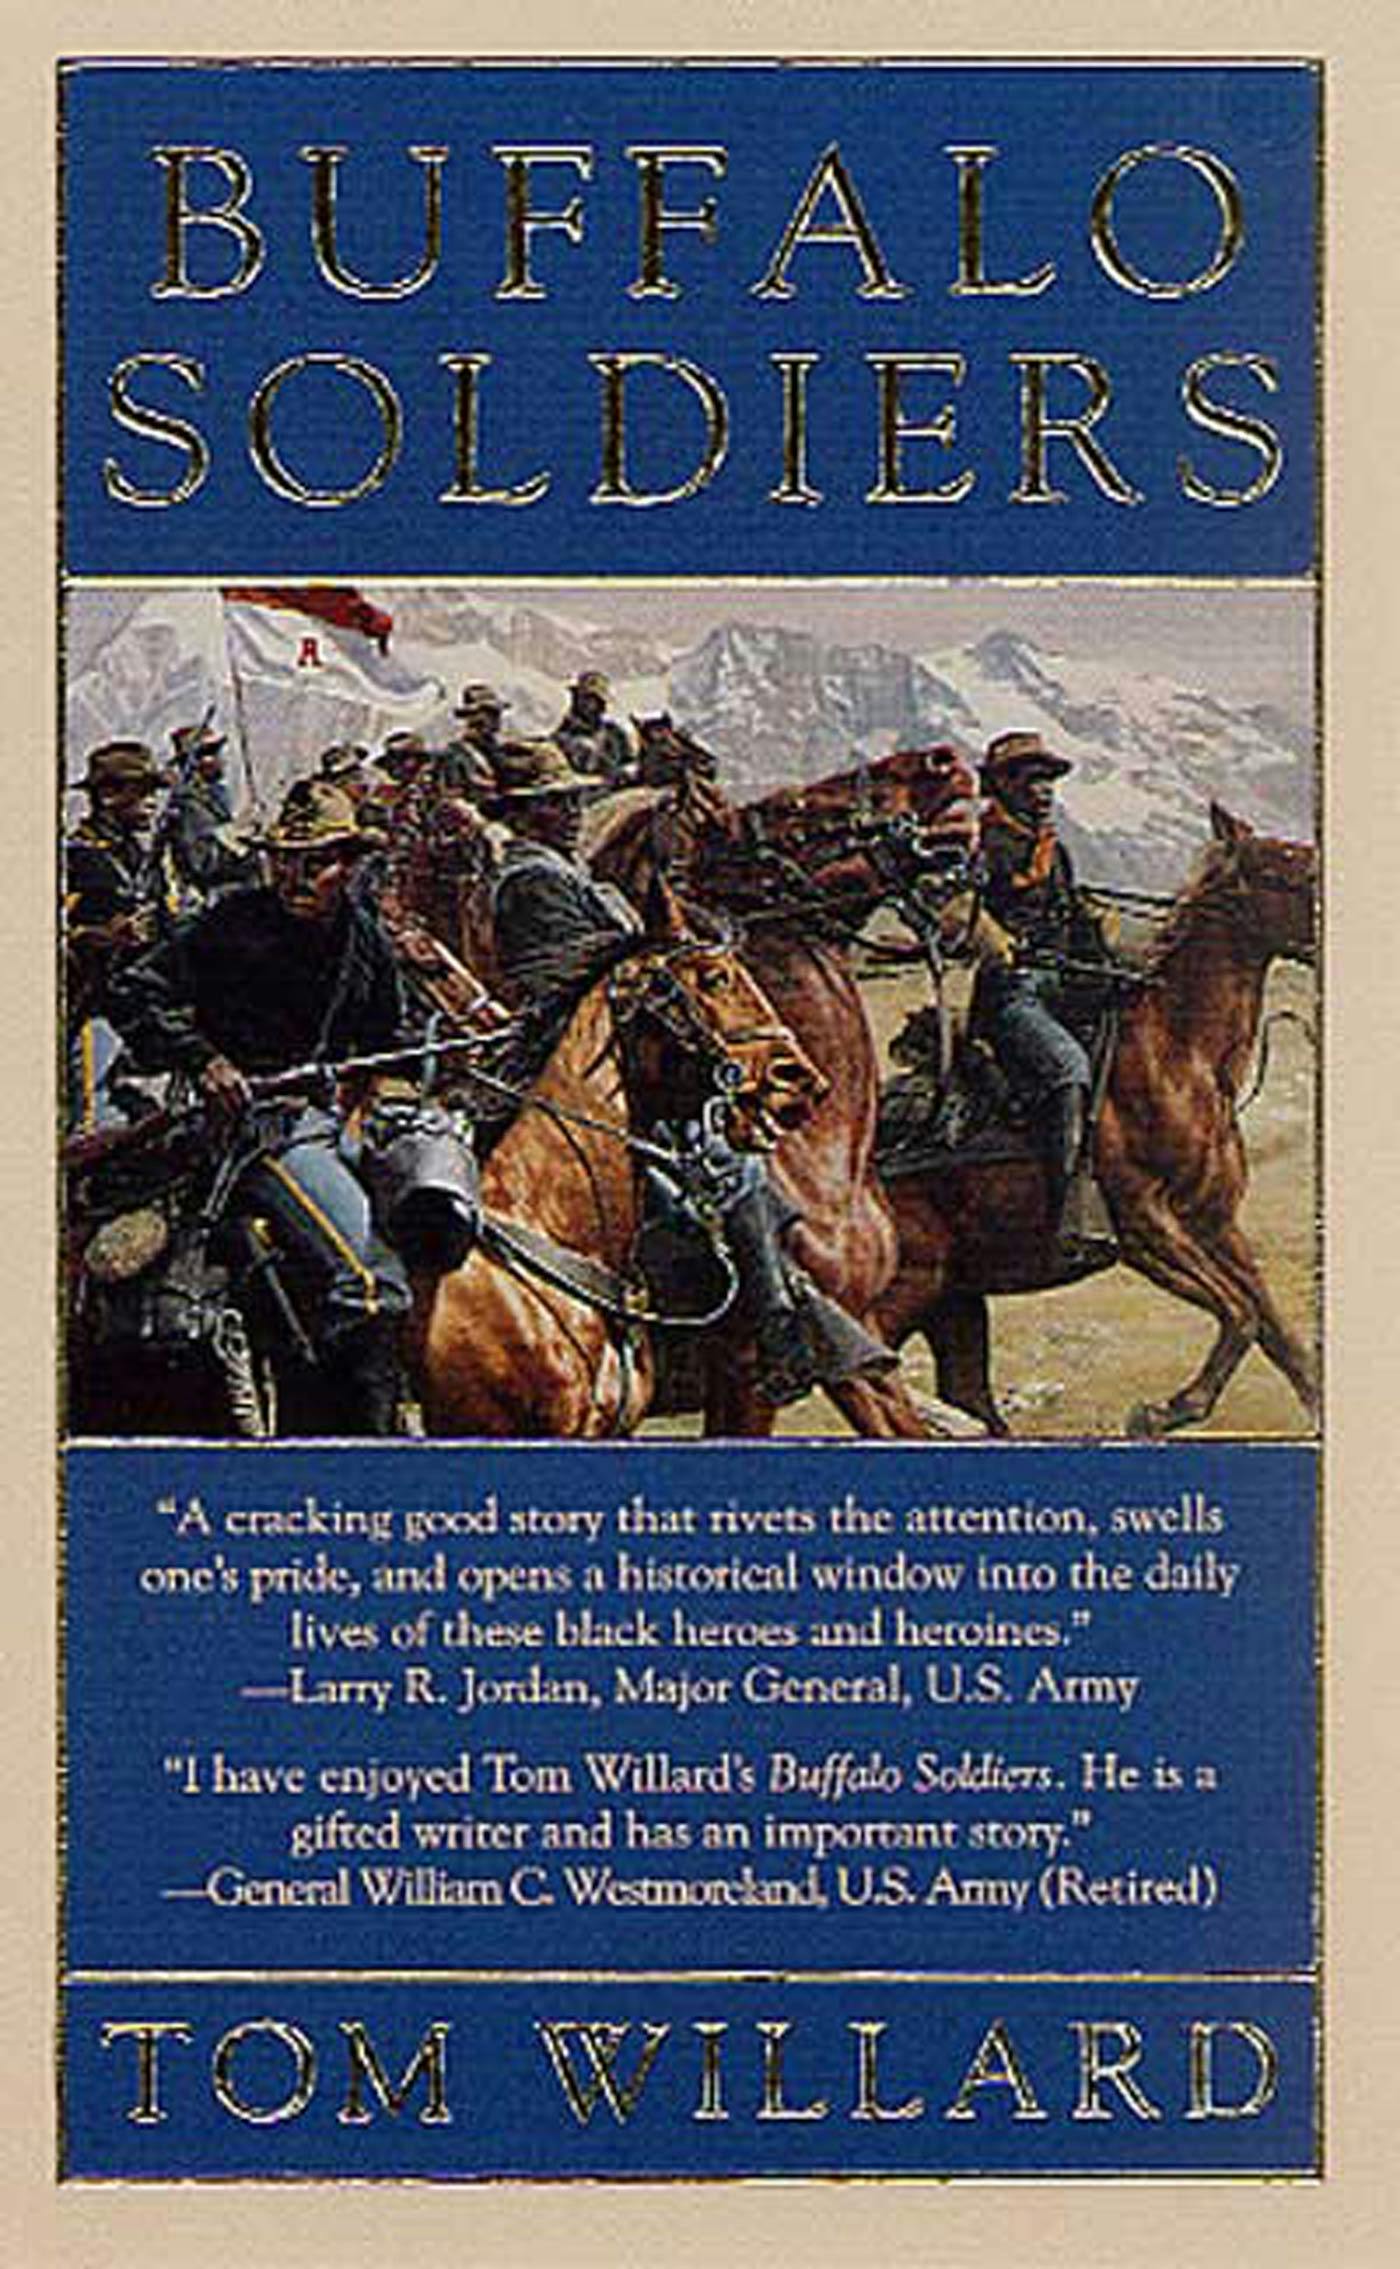 Cover for the book titled as: Buffalo Soldiers